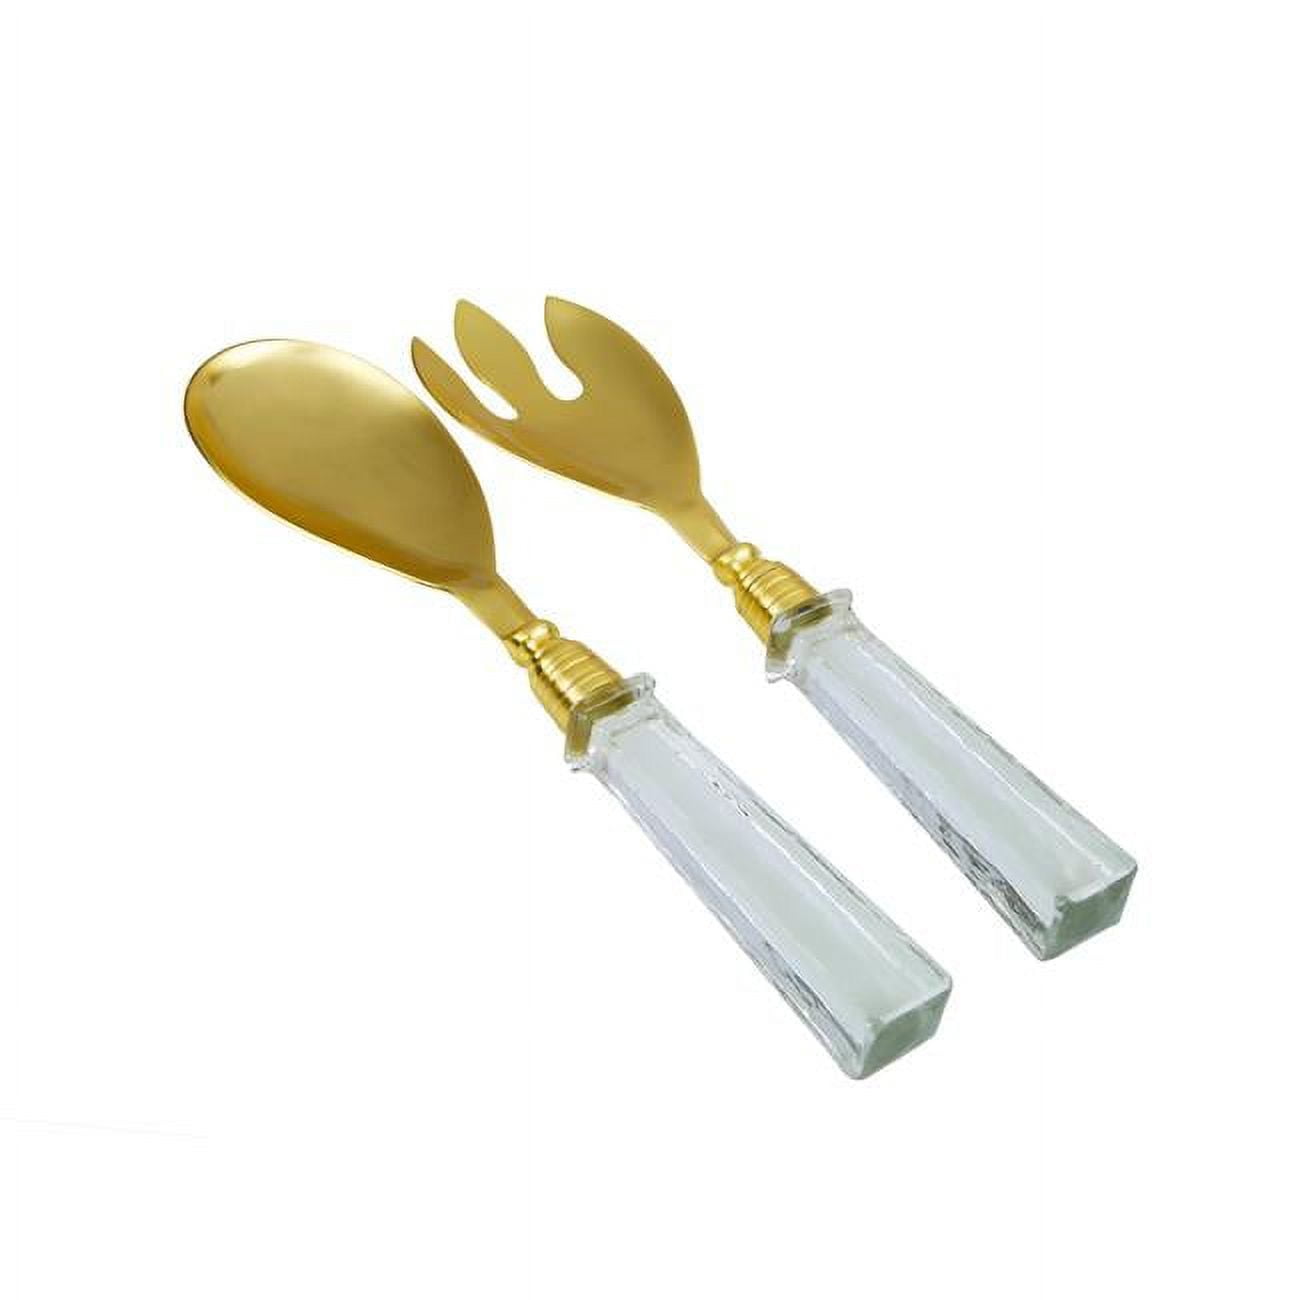 Classic Touch Ss461 Stainless Steel Salad Servers With Square Printed Acrylic Handles, Set Of 2